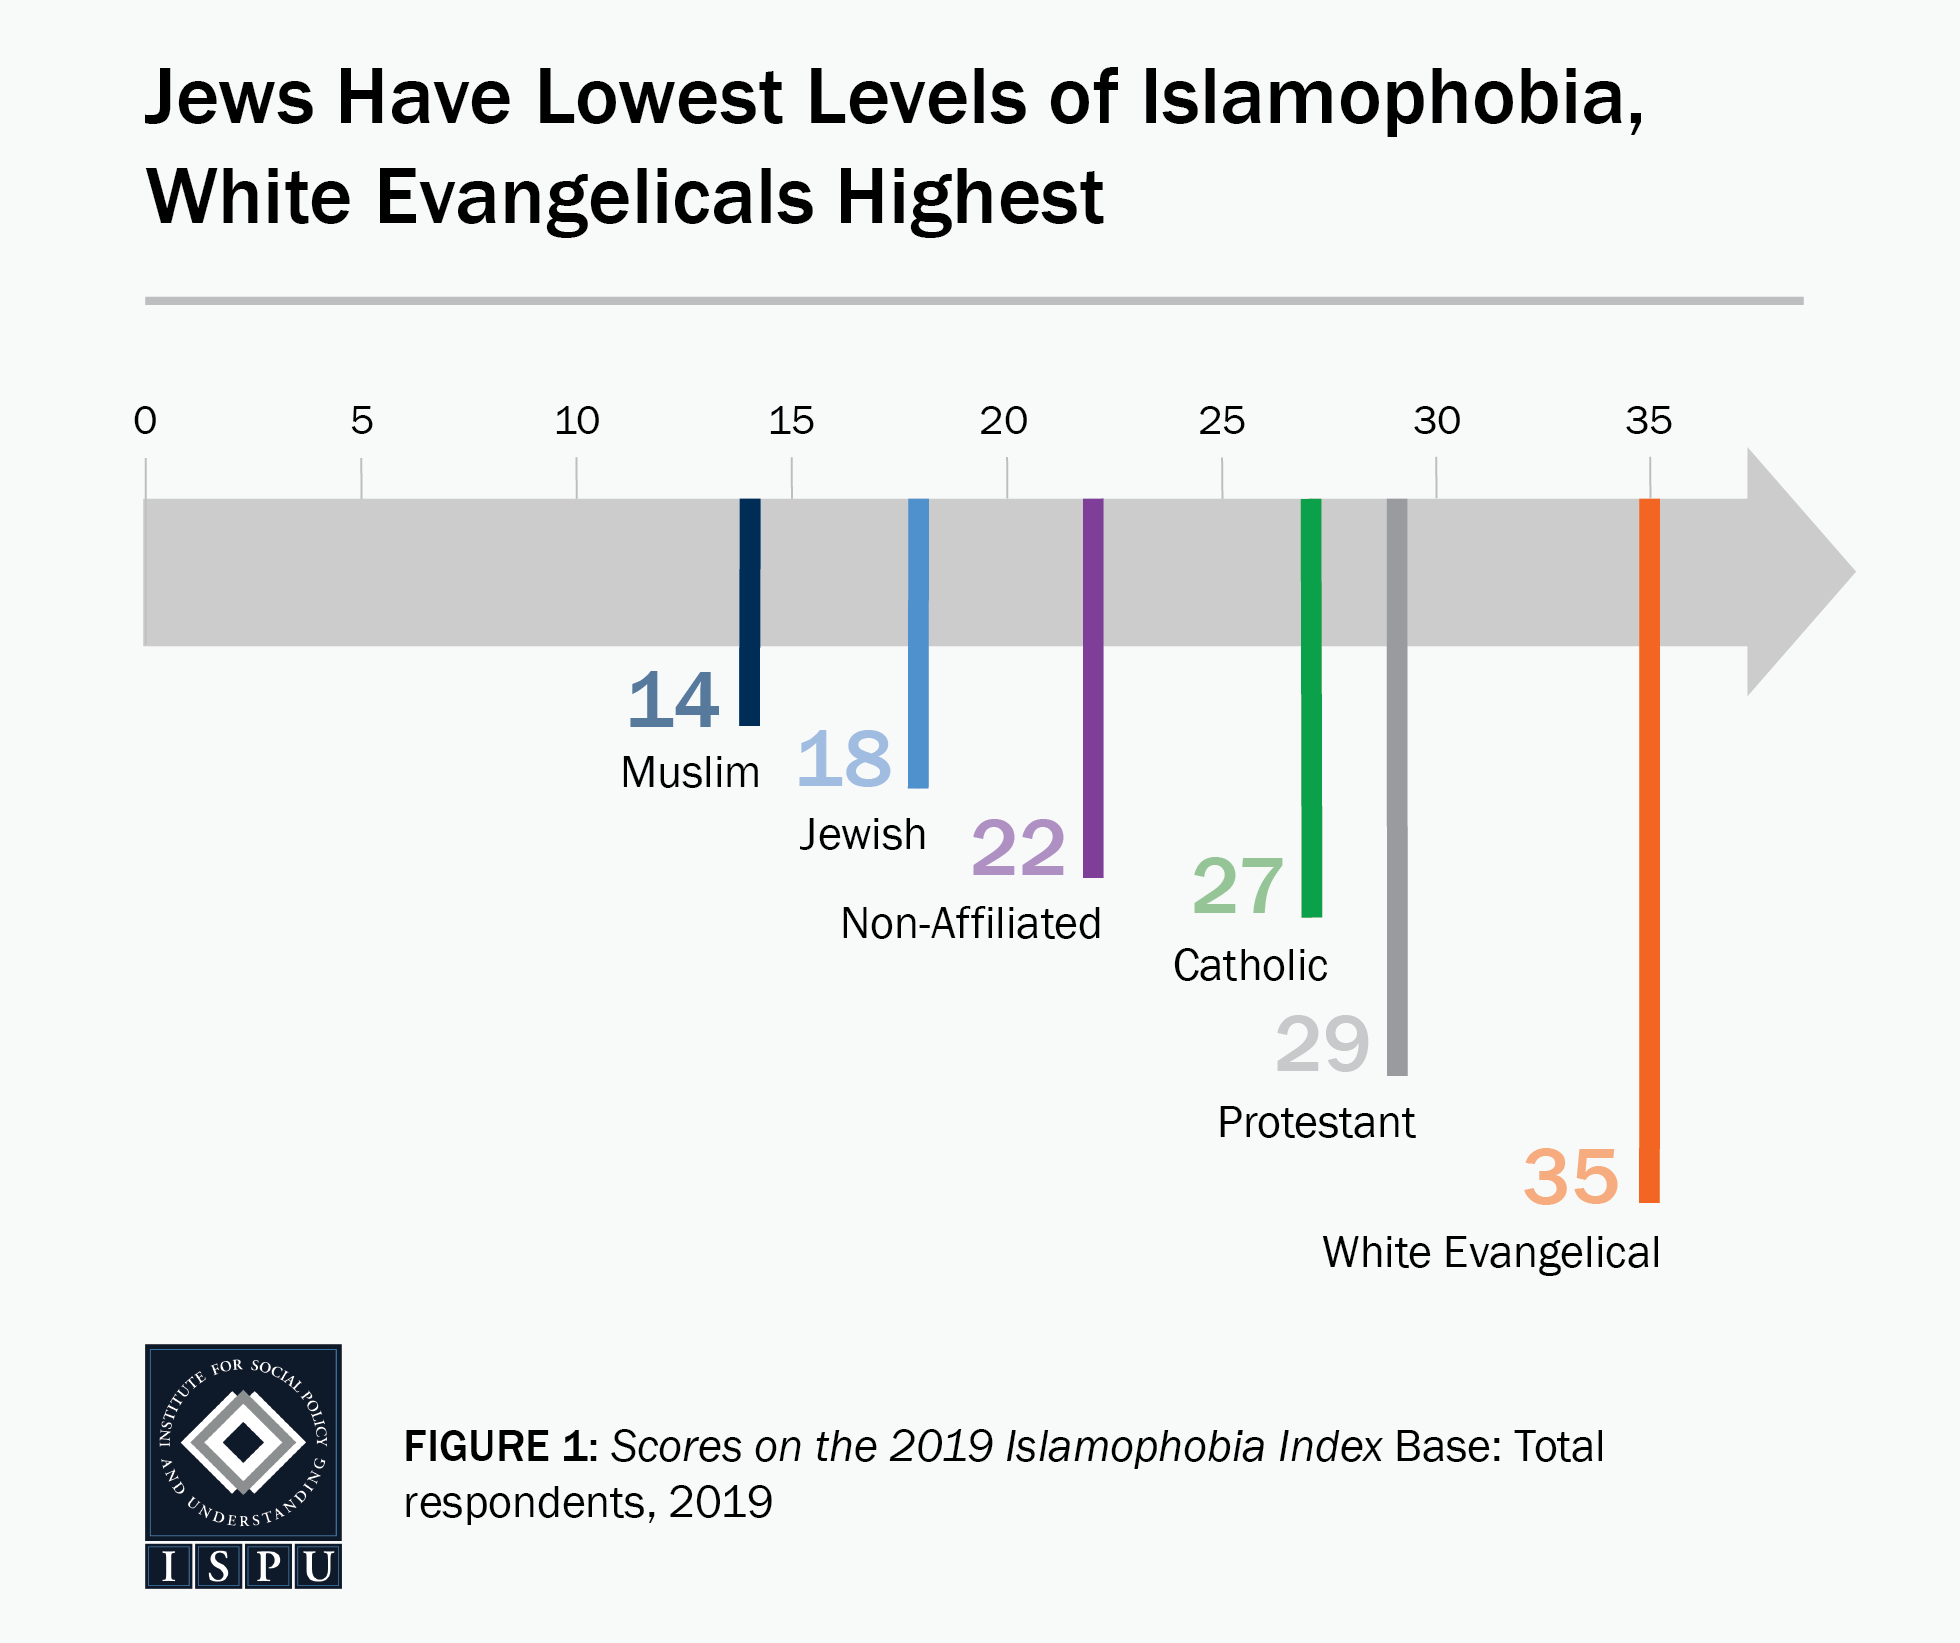 Figure 1: A graphic arrow showing where faith groups fall on the Islamophobia Index. Jews have the lowest levels of Islamophobia, white Evangelicals the highest